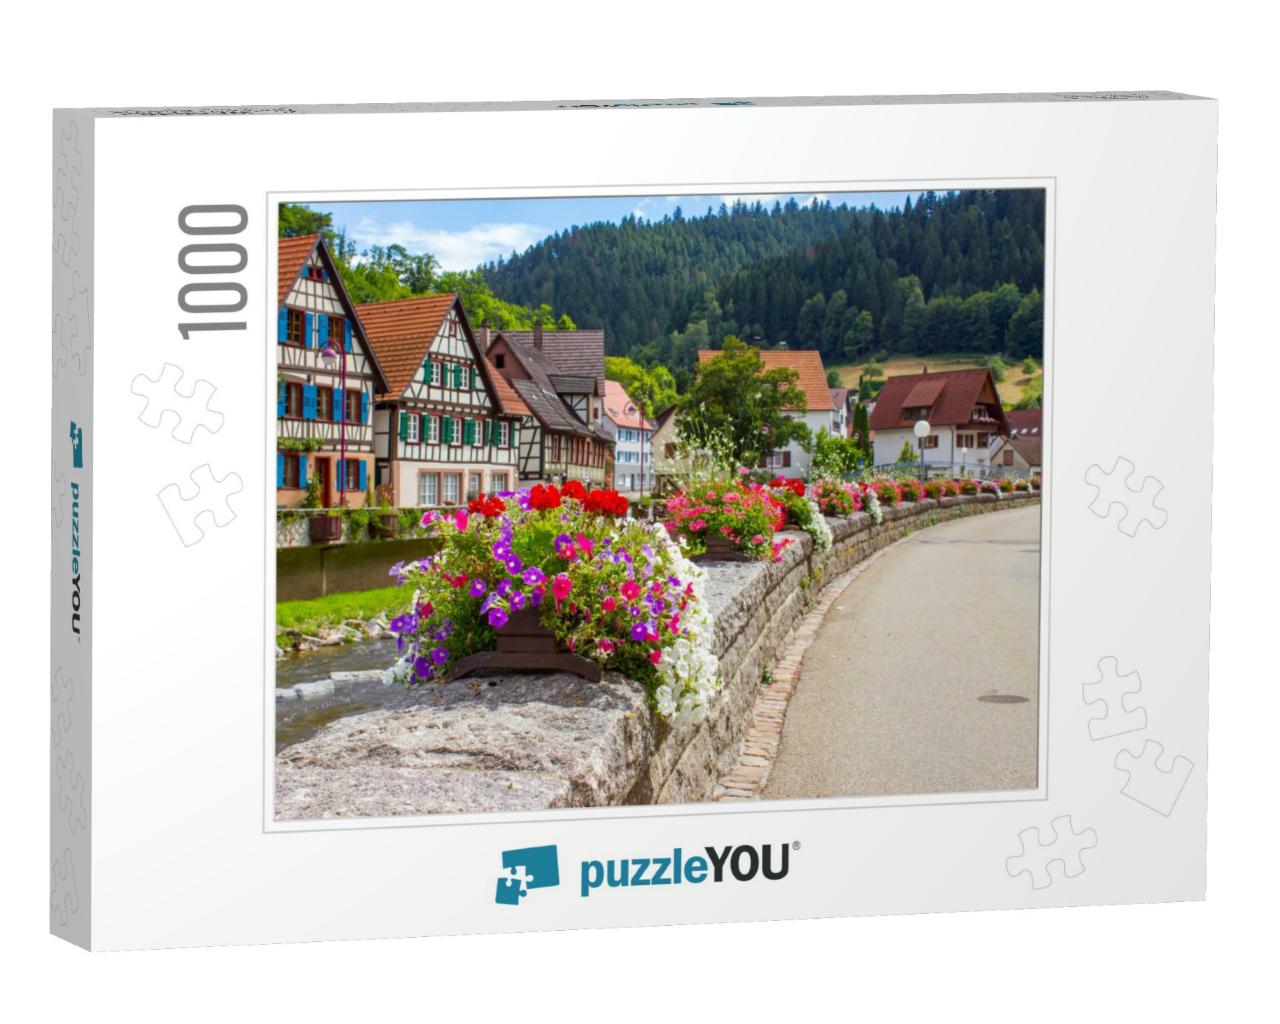 Beautiful Schiltach in Black Forest, Germany... Jigsaw Puzzle with 1000 pieces